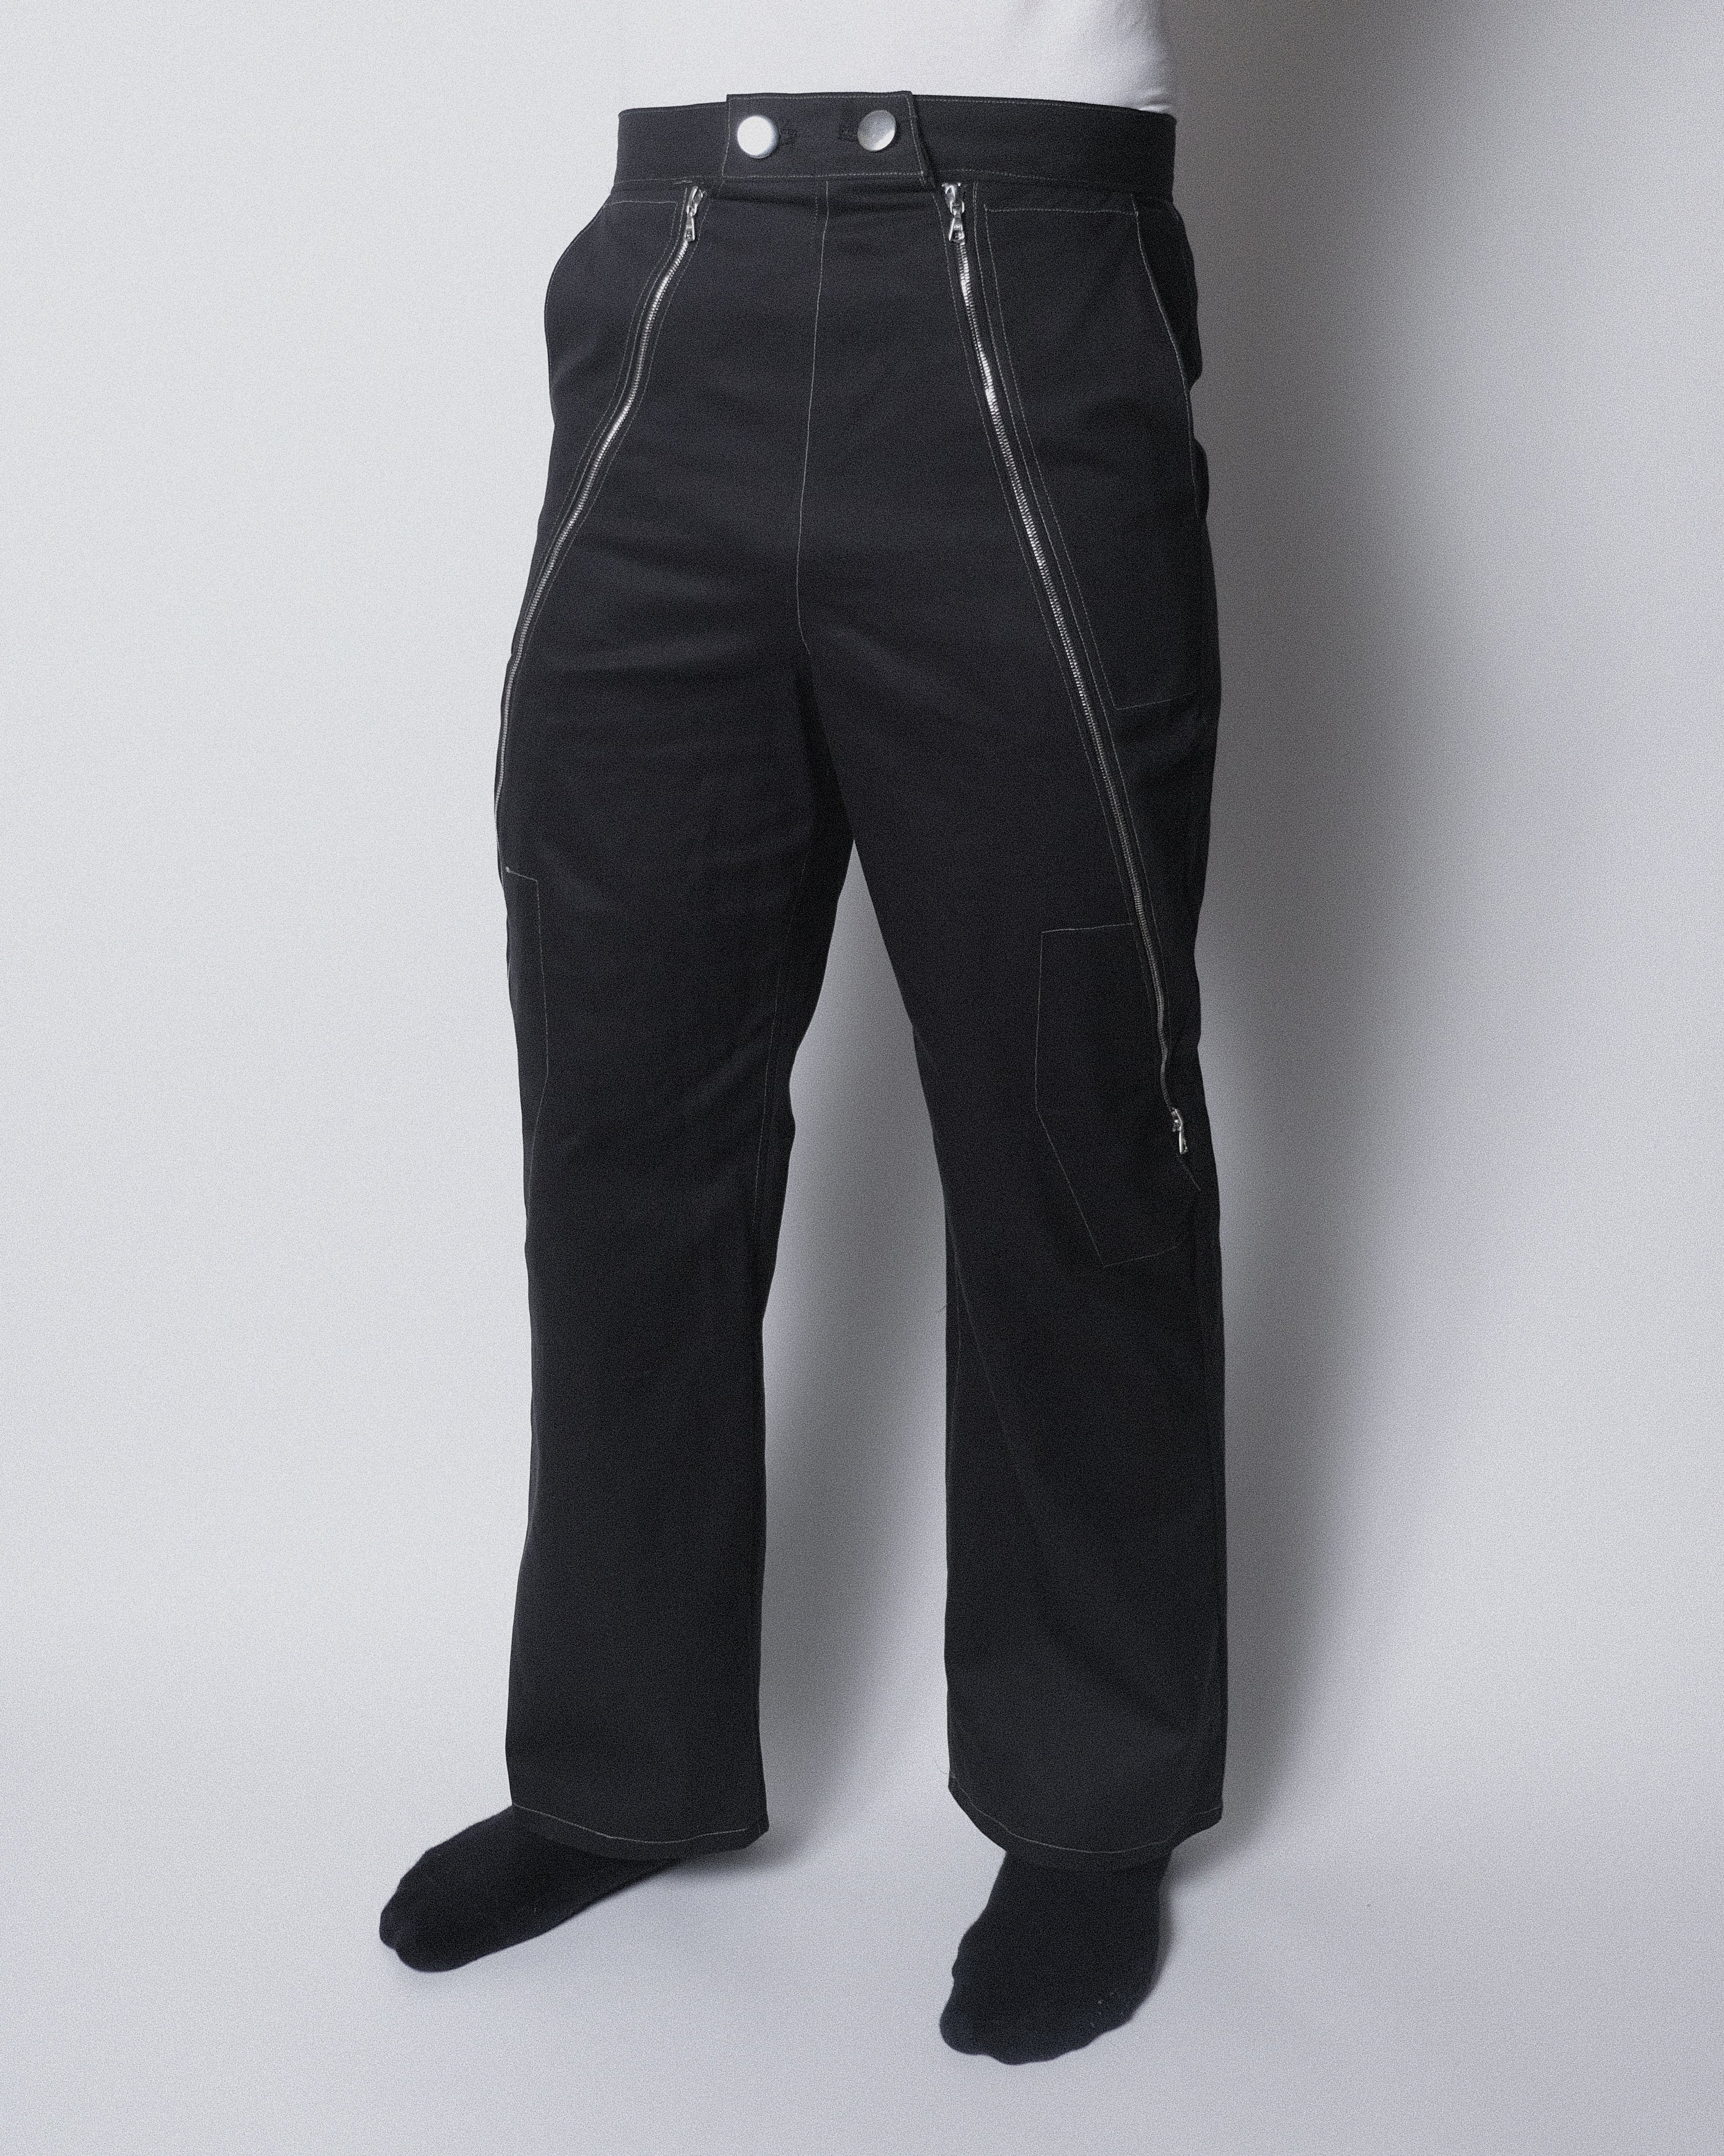 Speed Style Youth Pant - Black